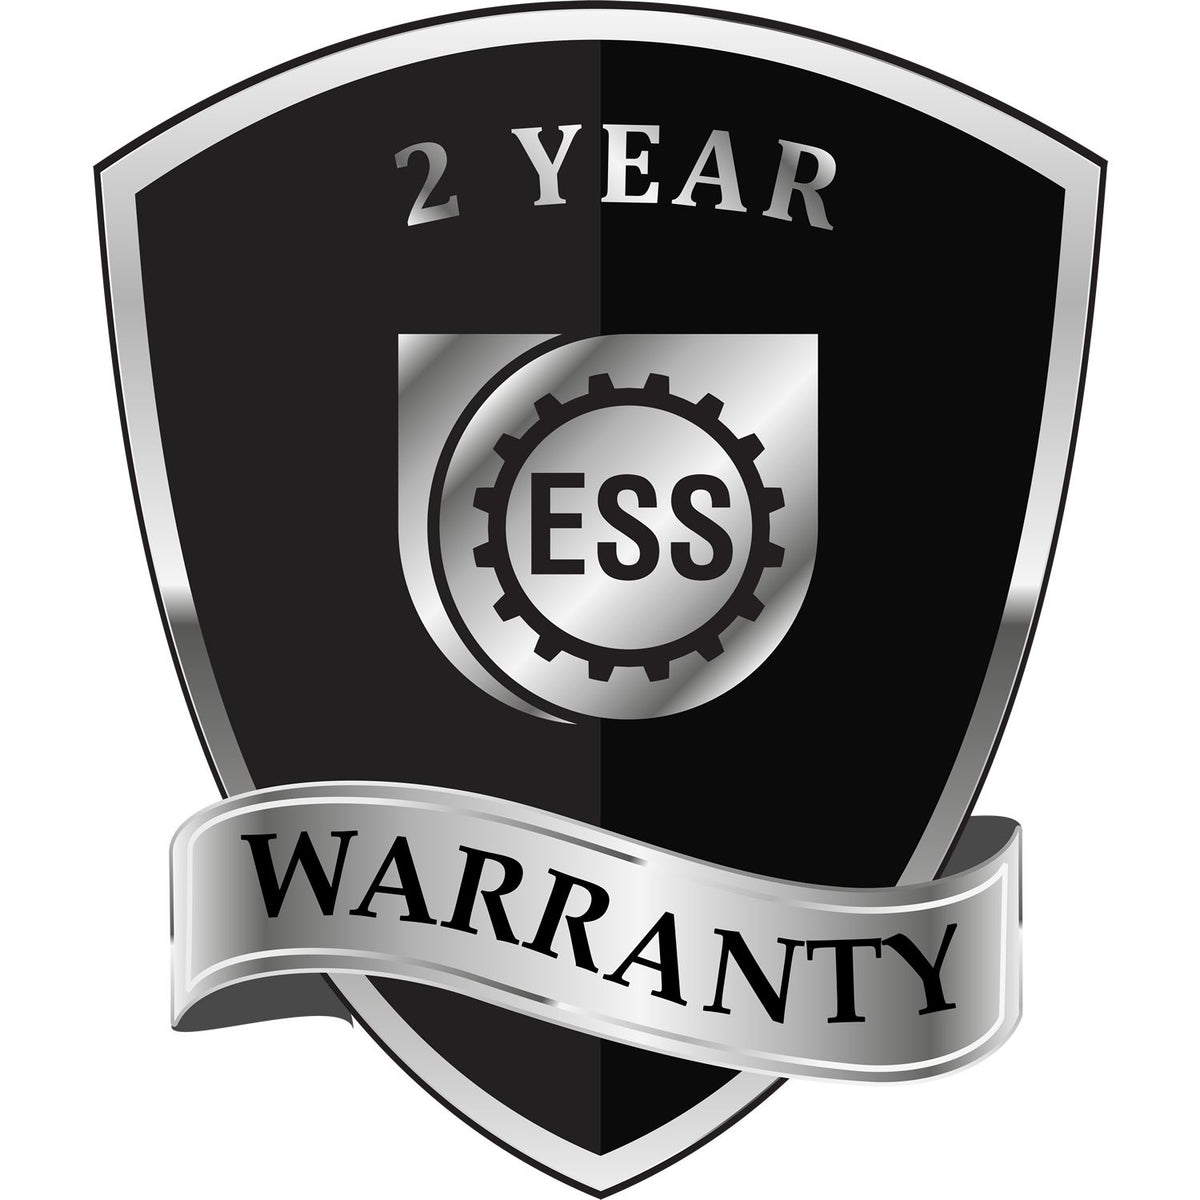 A badge or emblem showing a warranty icon for the Heavy Duty Cast Iron Vermont Architect Embosser